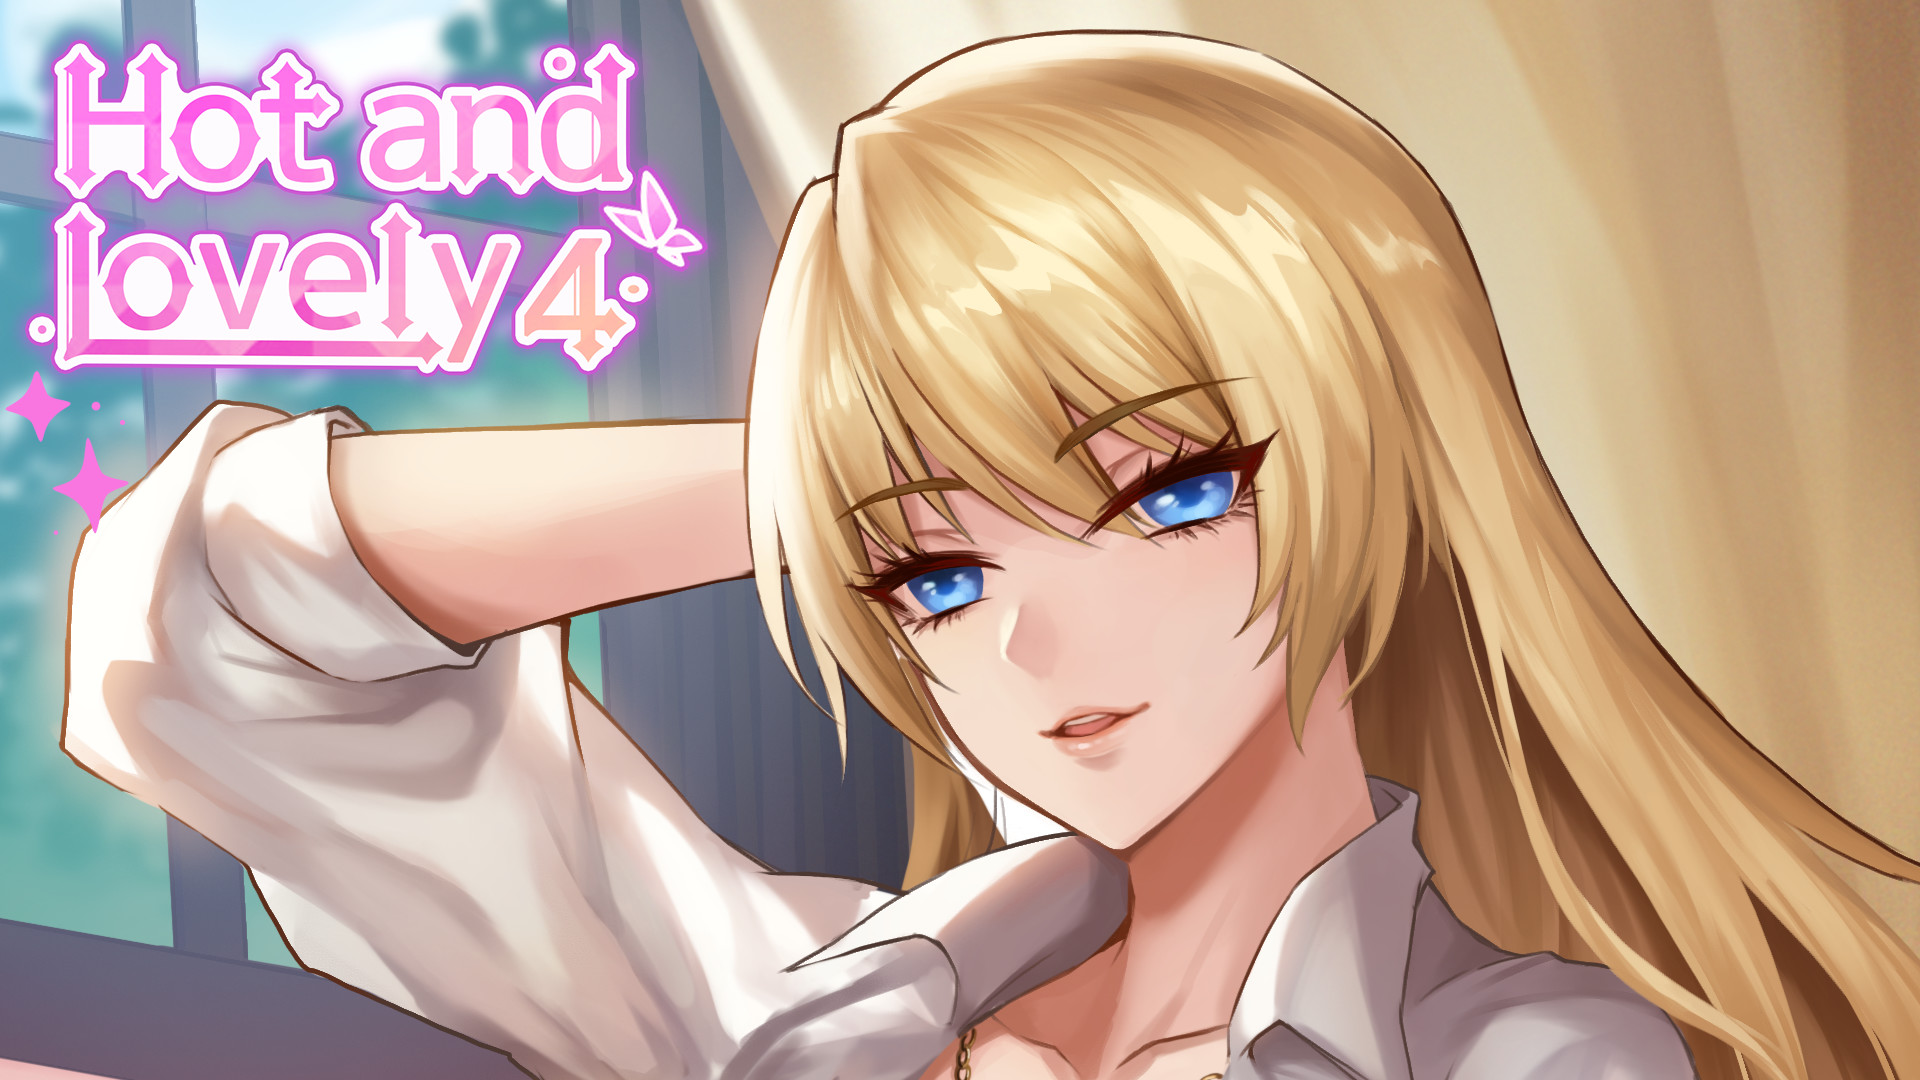 Hot and new 2. Lovely игра. Love & Lies игра. Hot and Lovely игра. Yume 2 Sleepless Night 18.